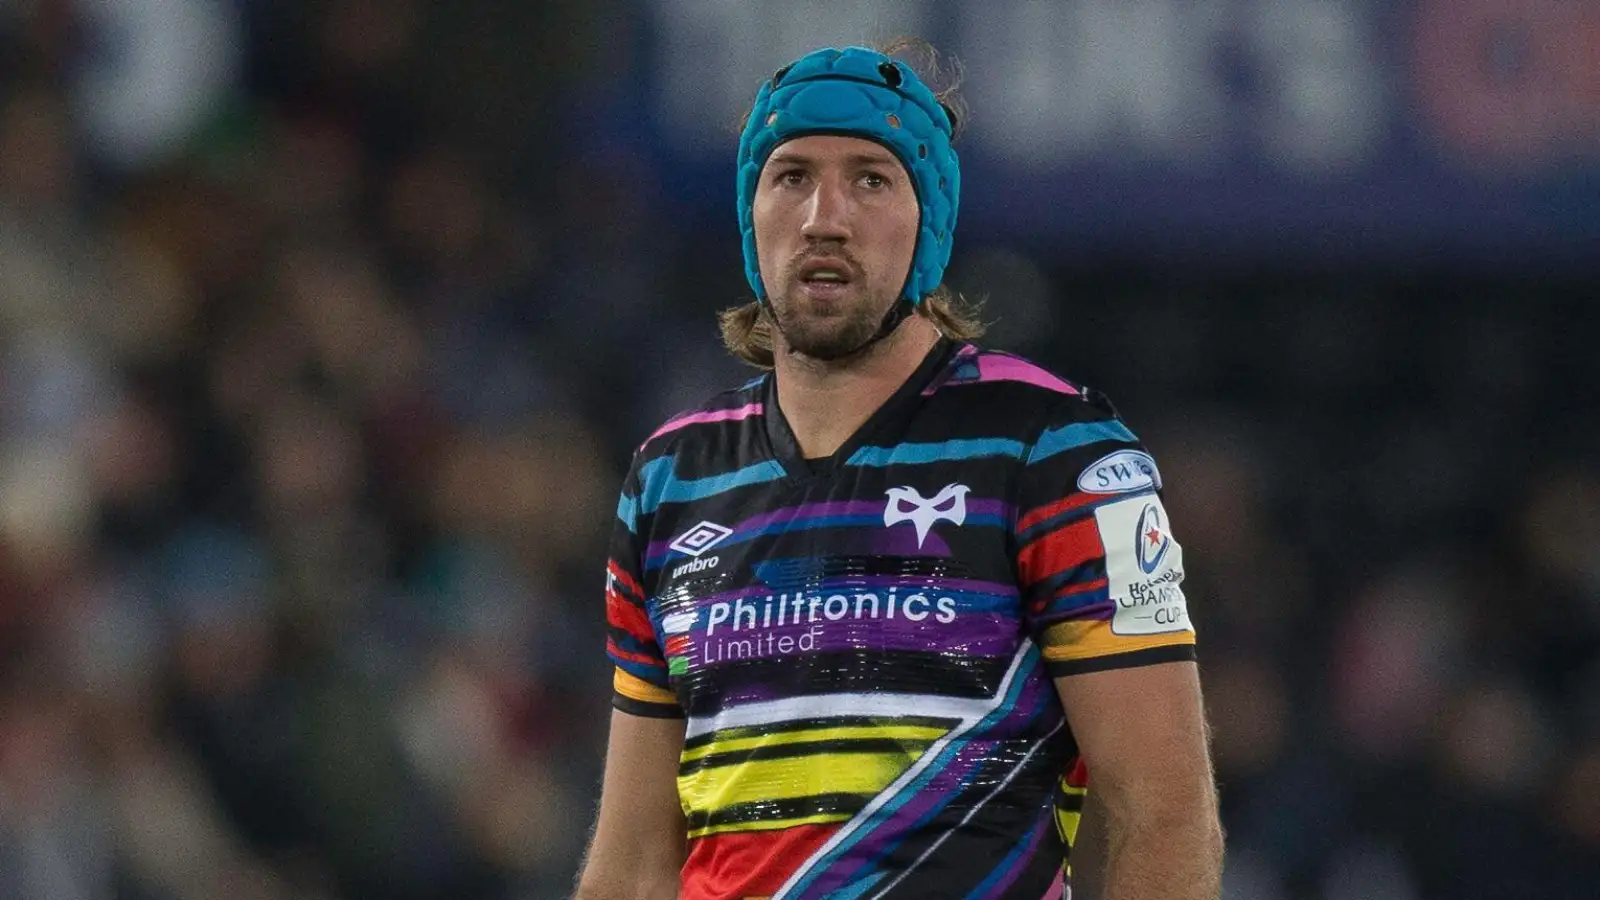 Ospreys veteran Justin Tipuric looks on during a game.